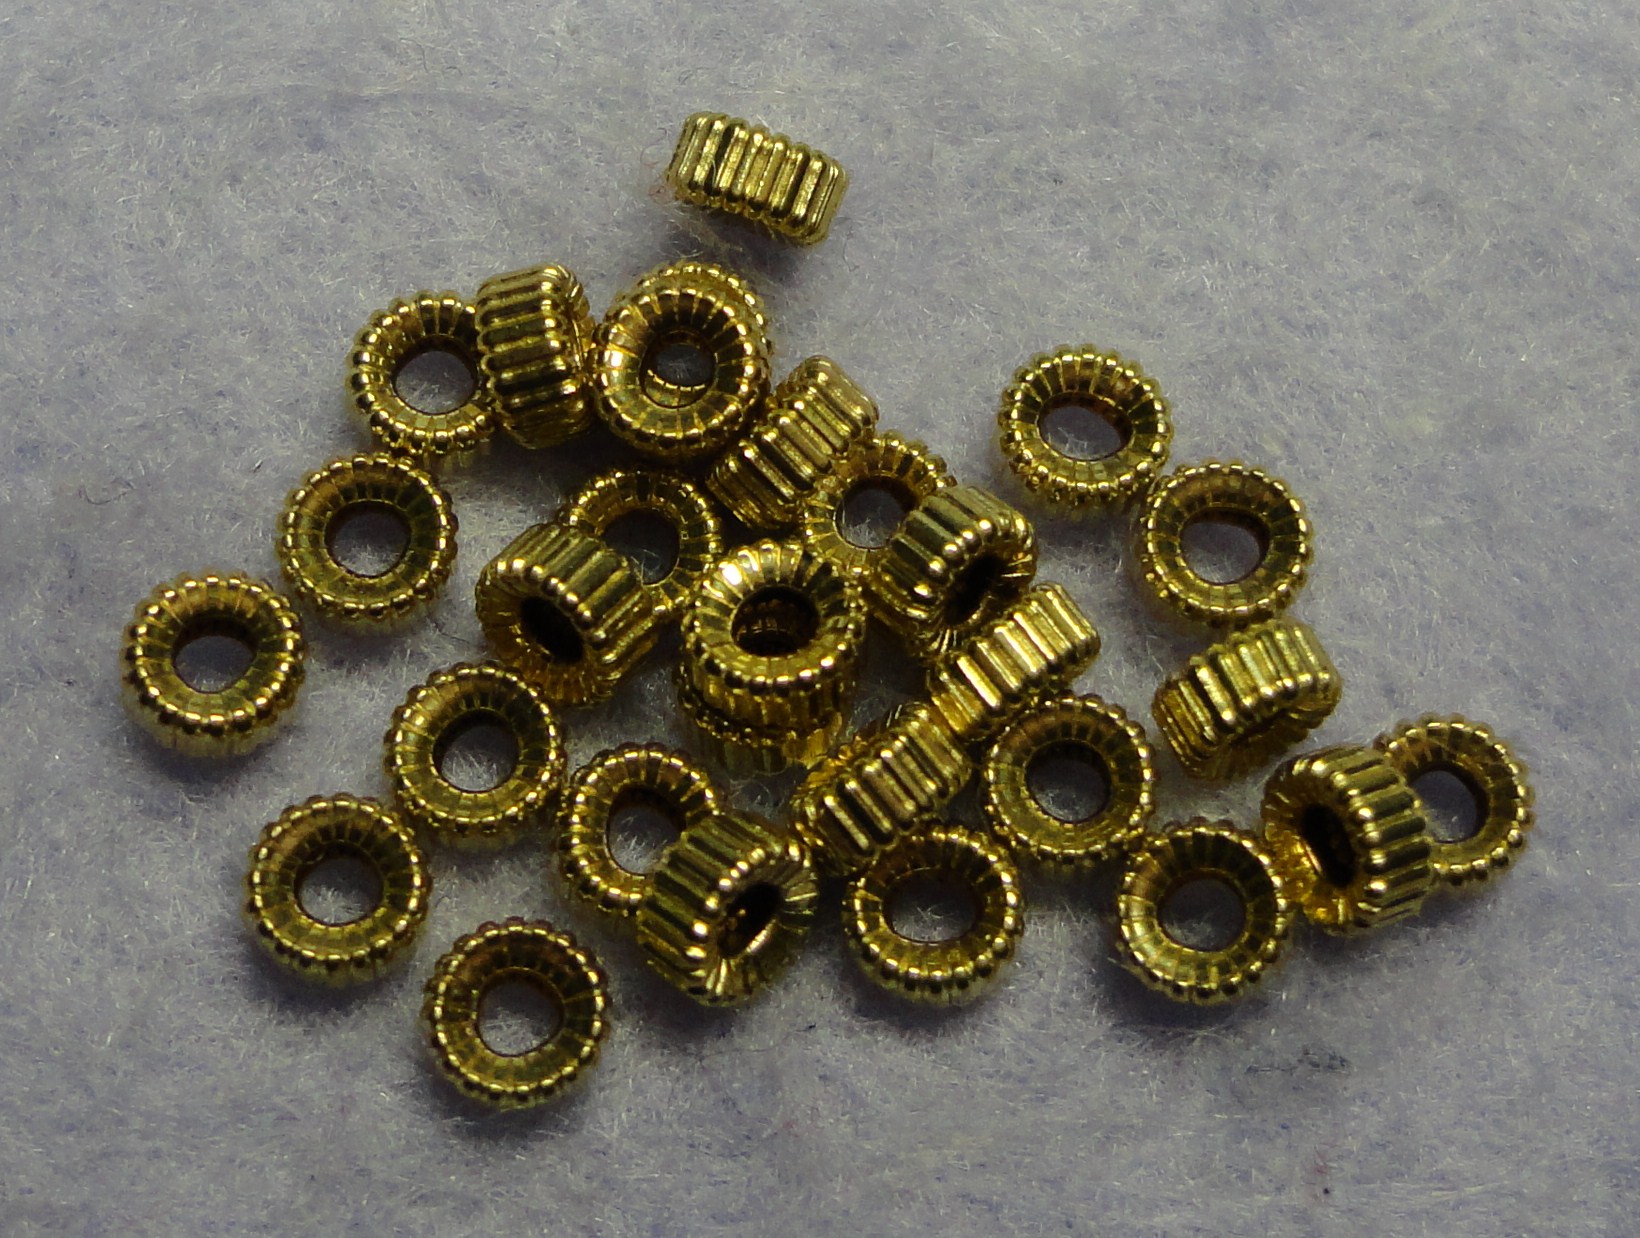 14 KT SOLID YELLOW GOLD ROUNDEL CORR. BEADS 3.14 MM 6 PIECES